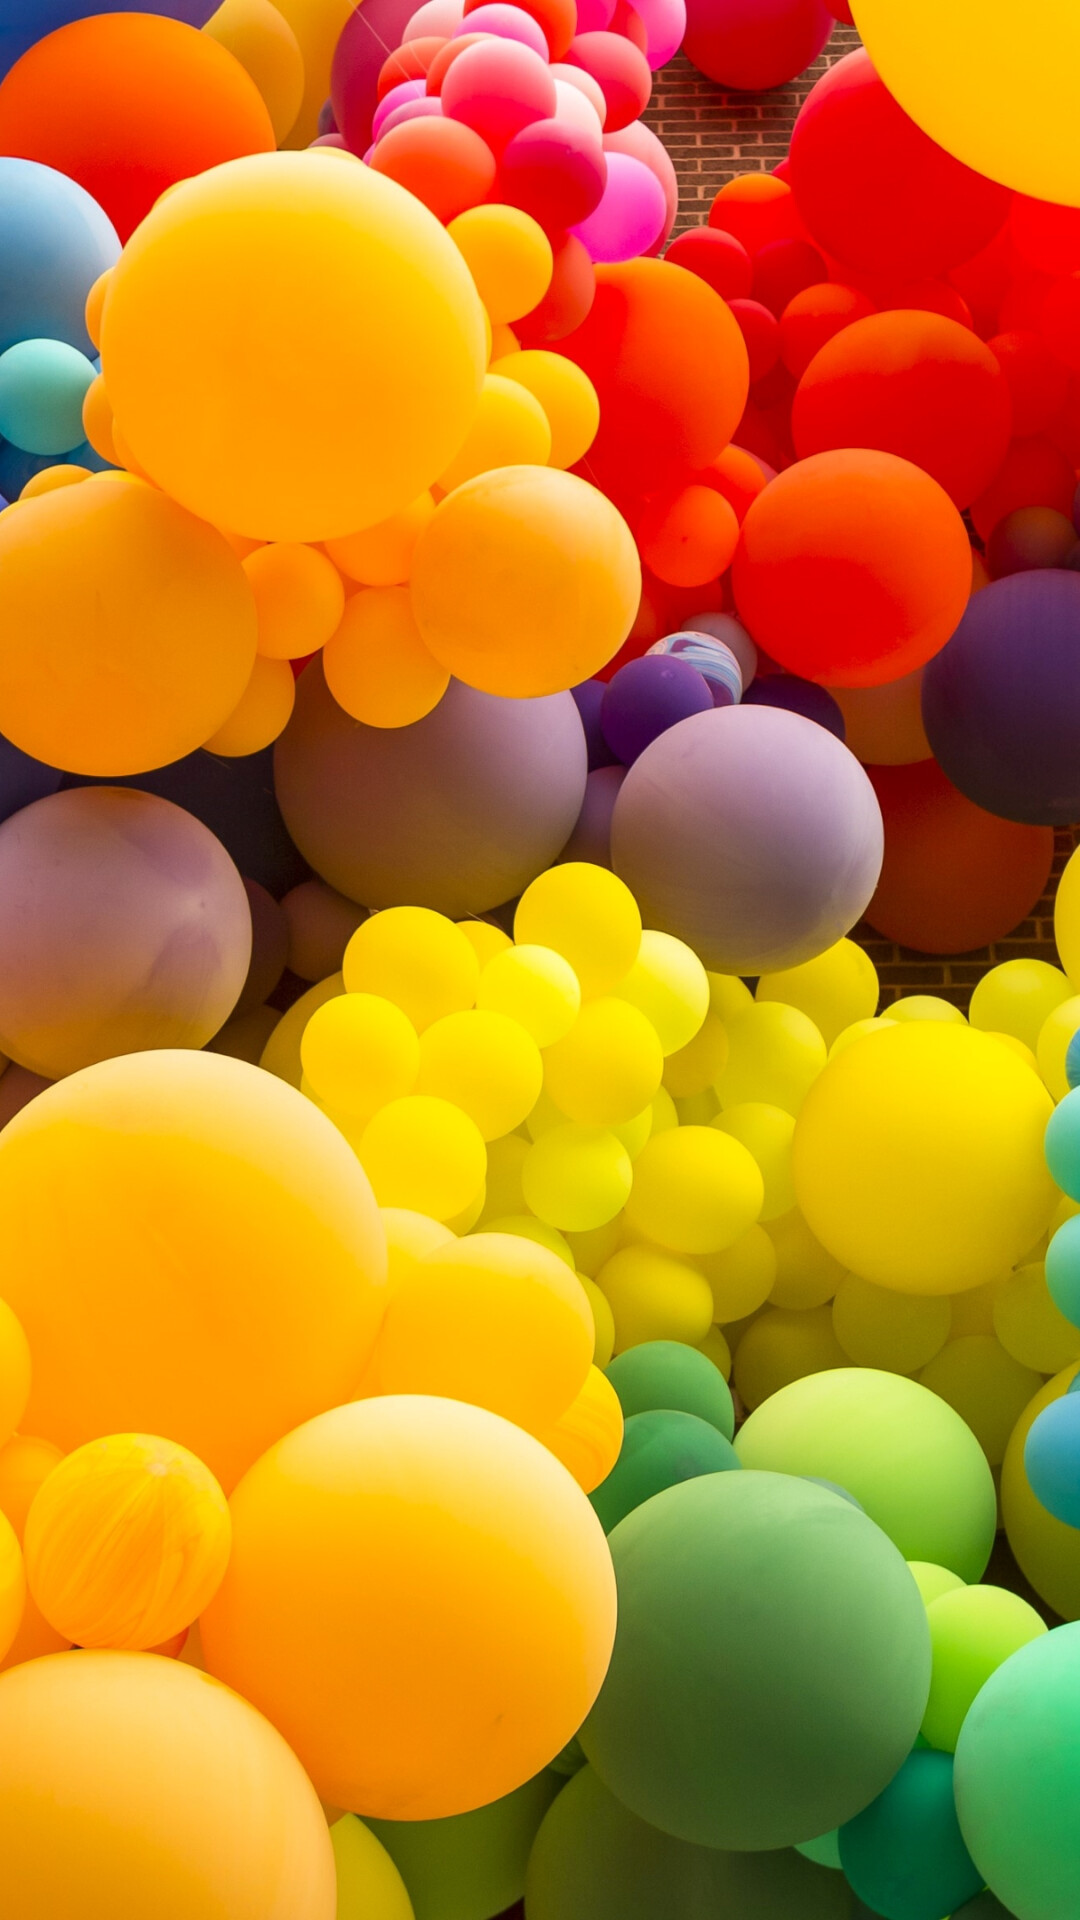 Balloons: An inflatable bag used as a toy or for decoration. 1080x1920 Full HD Background.